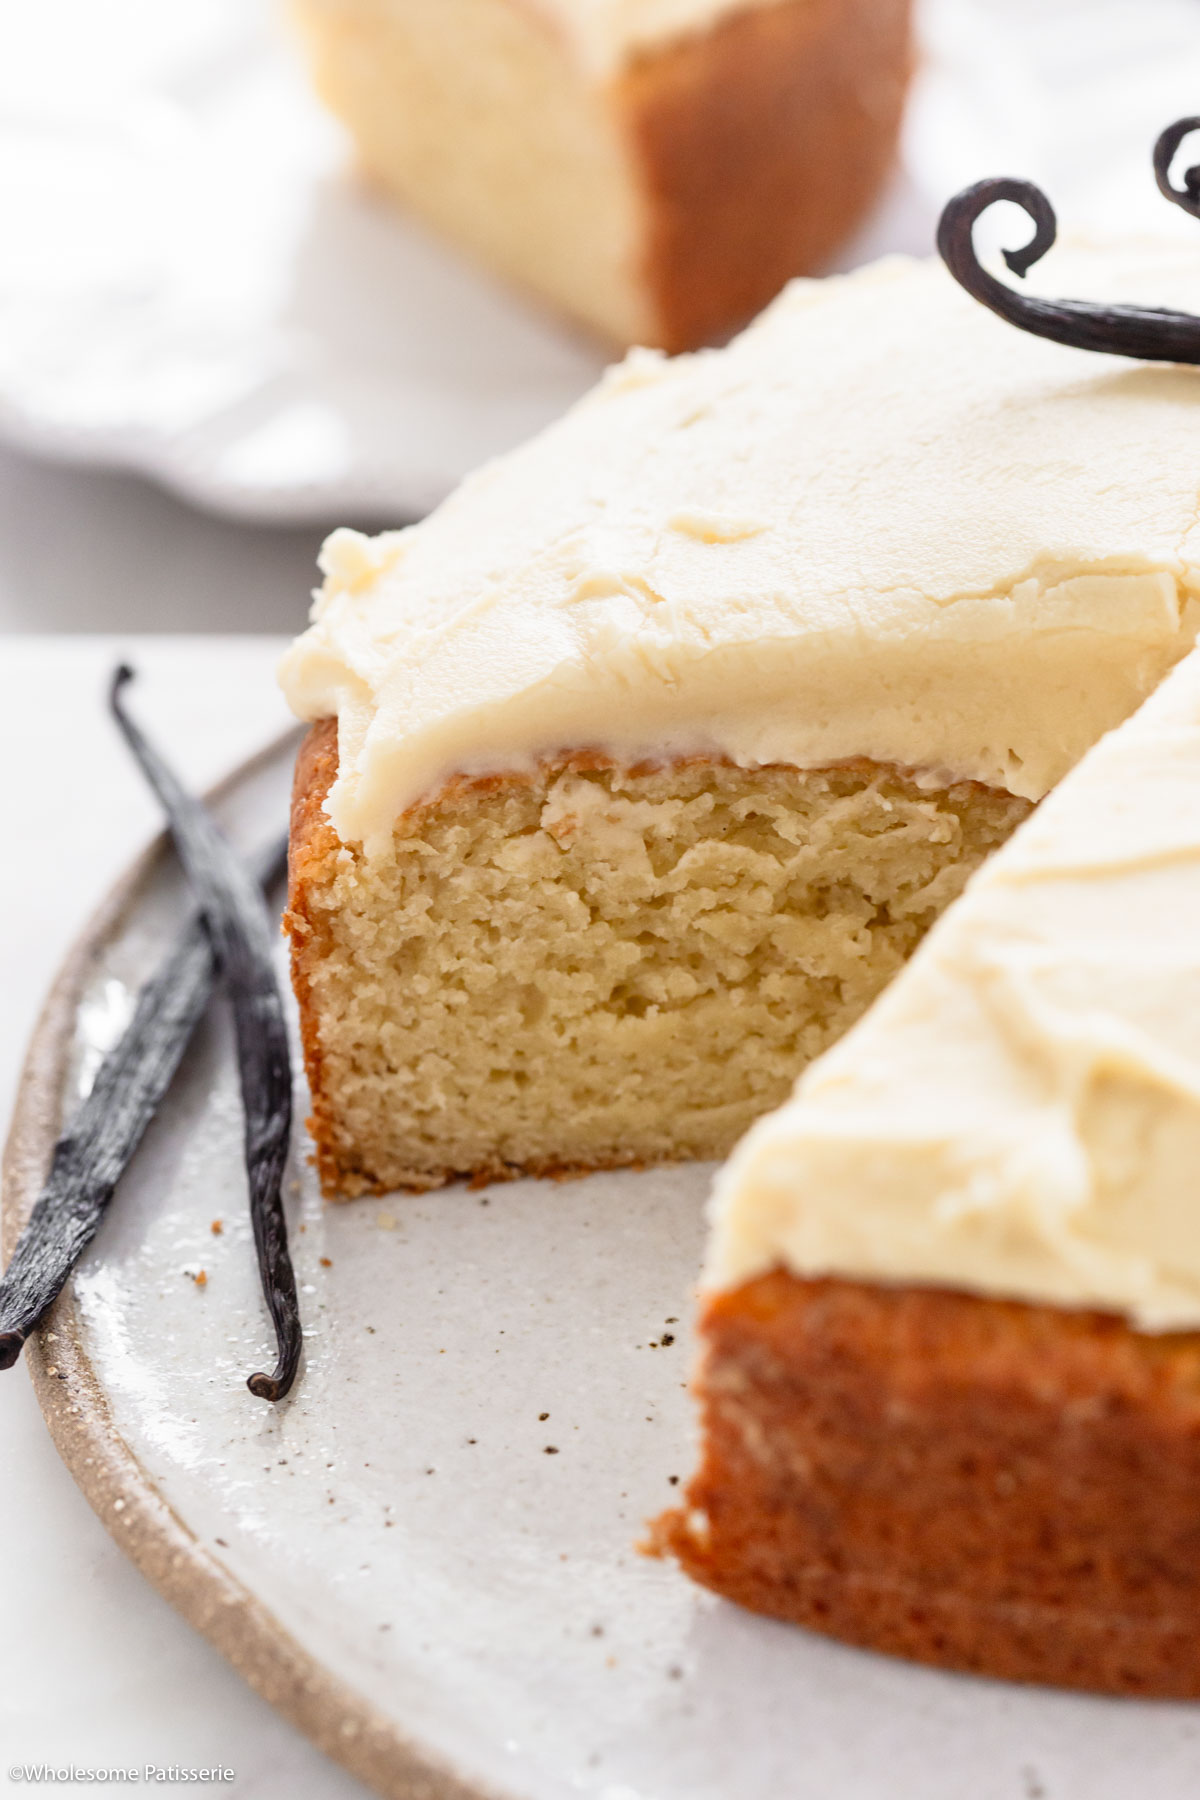 Close up view of eggless vanilla cake sliced to show texture inside